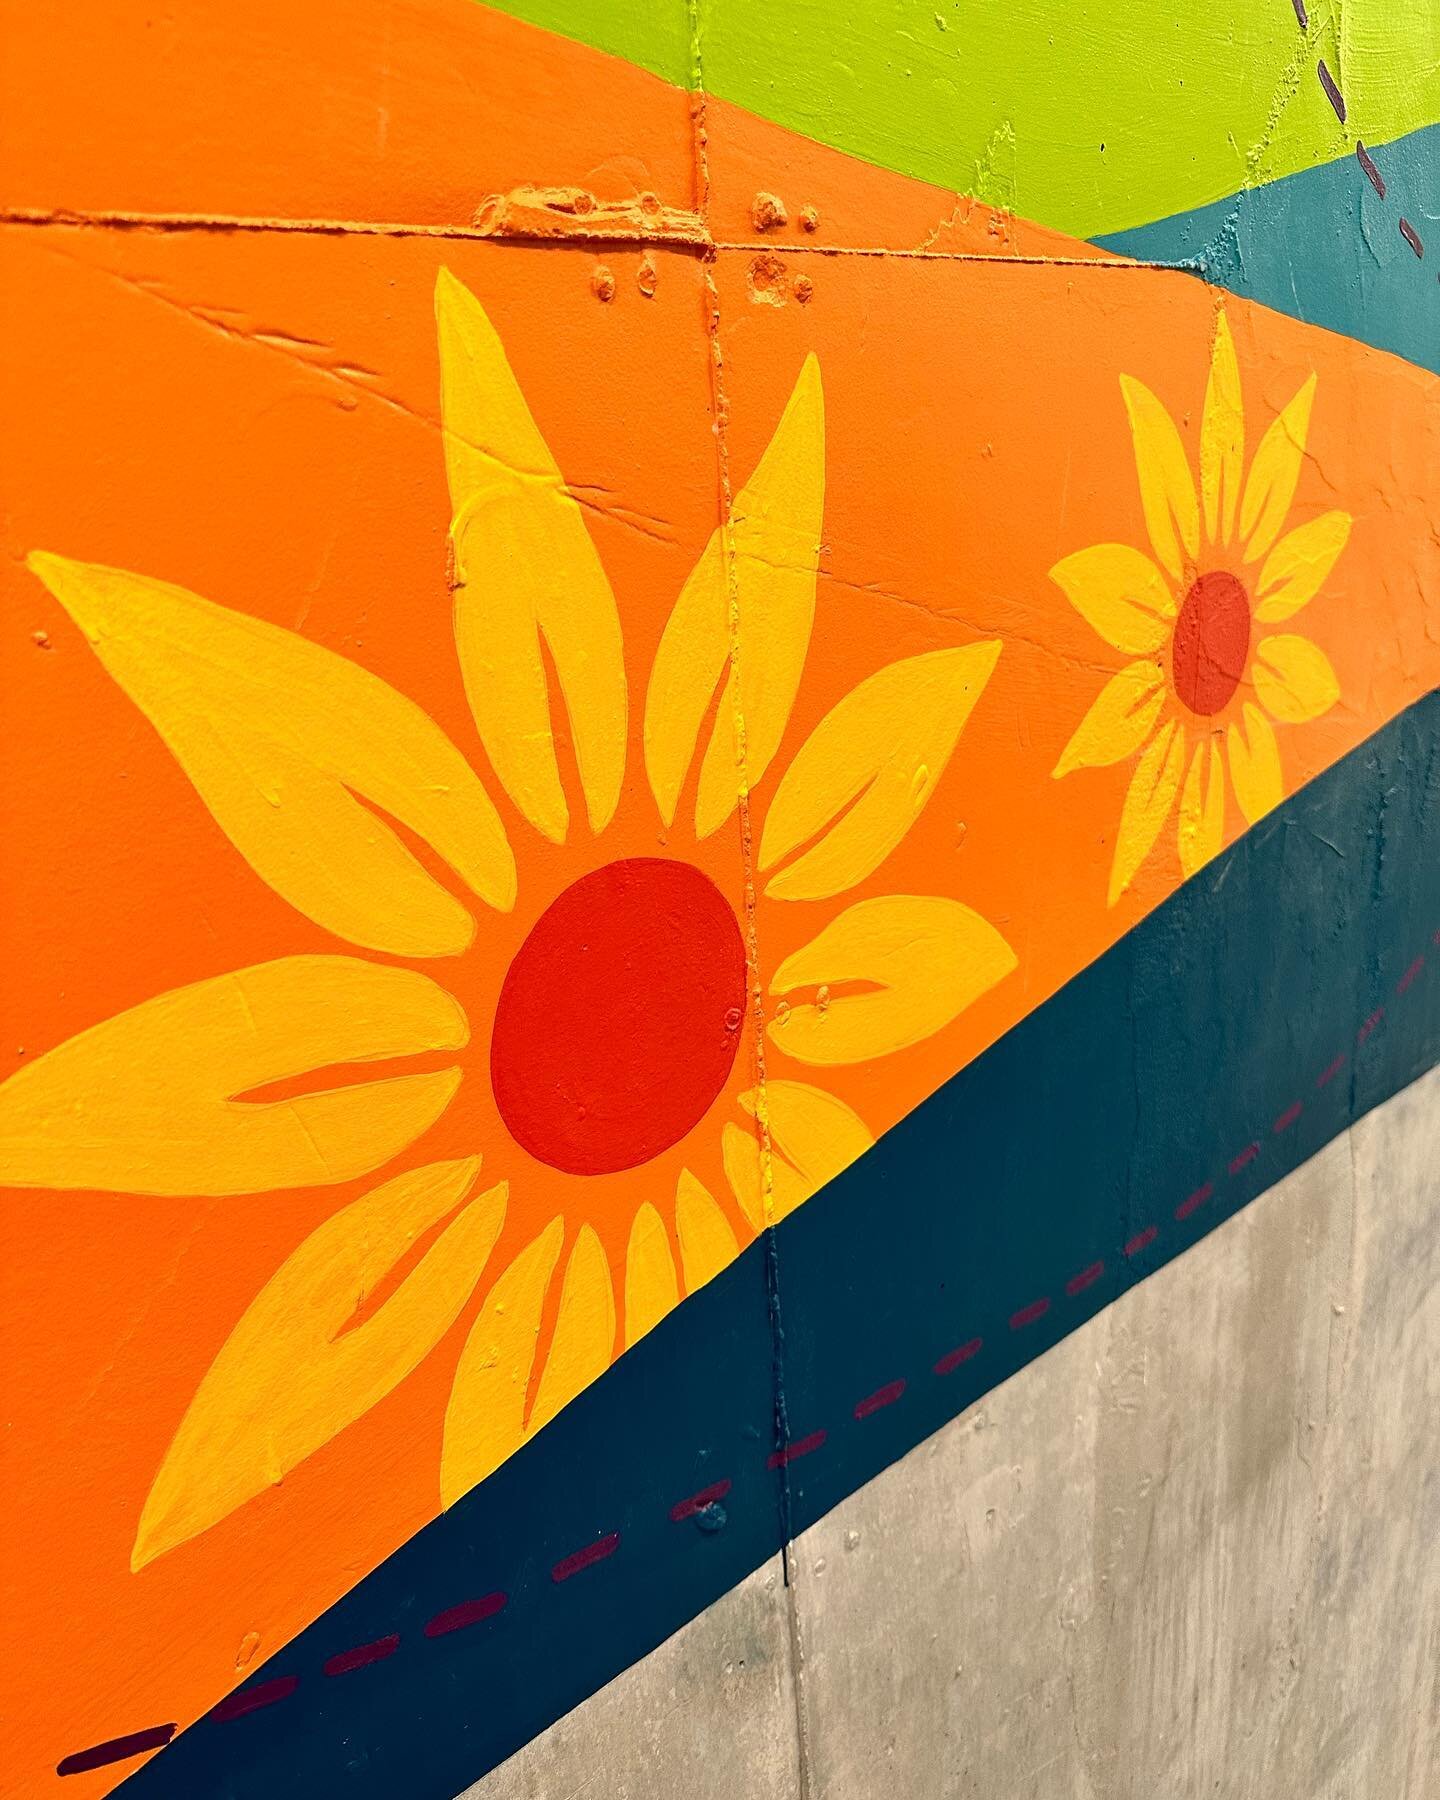 stop and smell the 🌻 🌻 🌻 

&gt;&gt; SWIPE &gt;&gt; to watch me paint! 

#atx #austin #austintexas #texas #austinmurals #atxmurals #muralist #mural #atxmuralartist #austinmuralartist #sunflower #flower  #paintedflowers